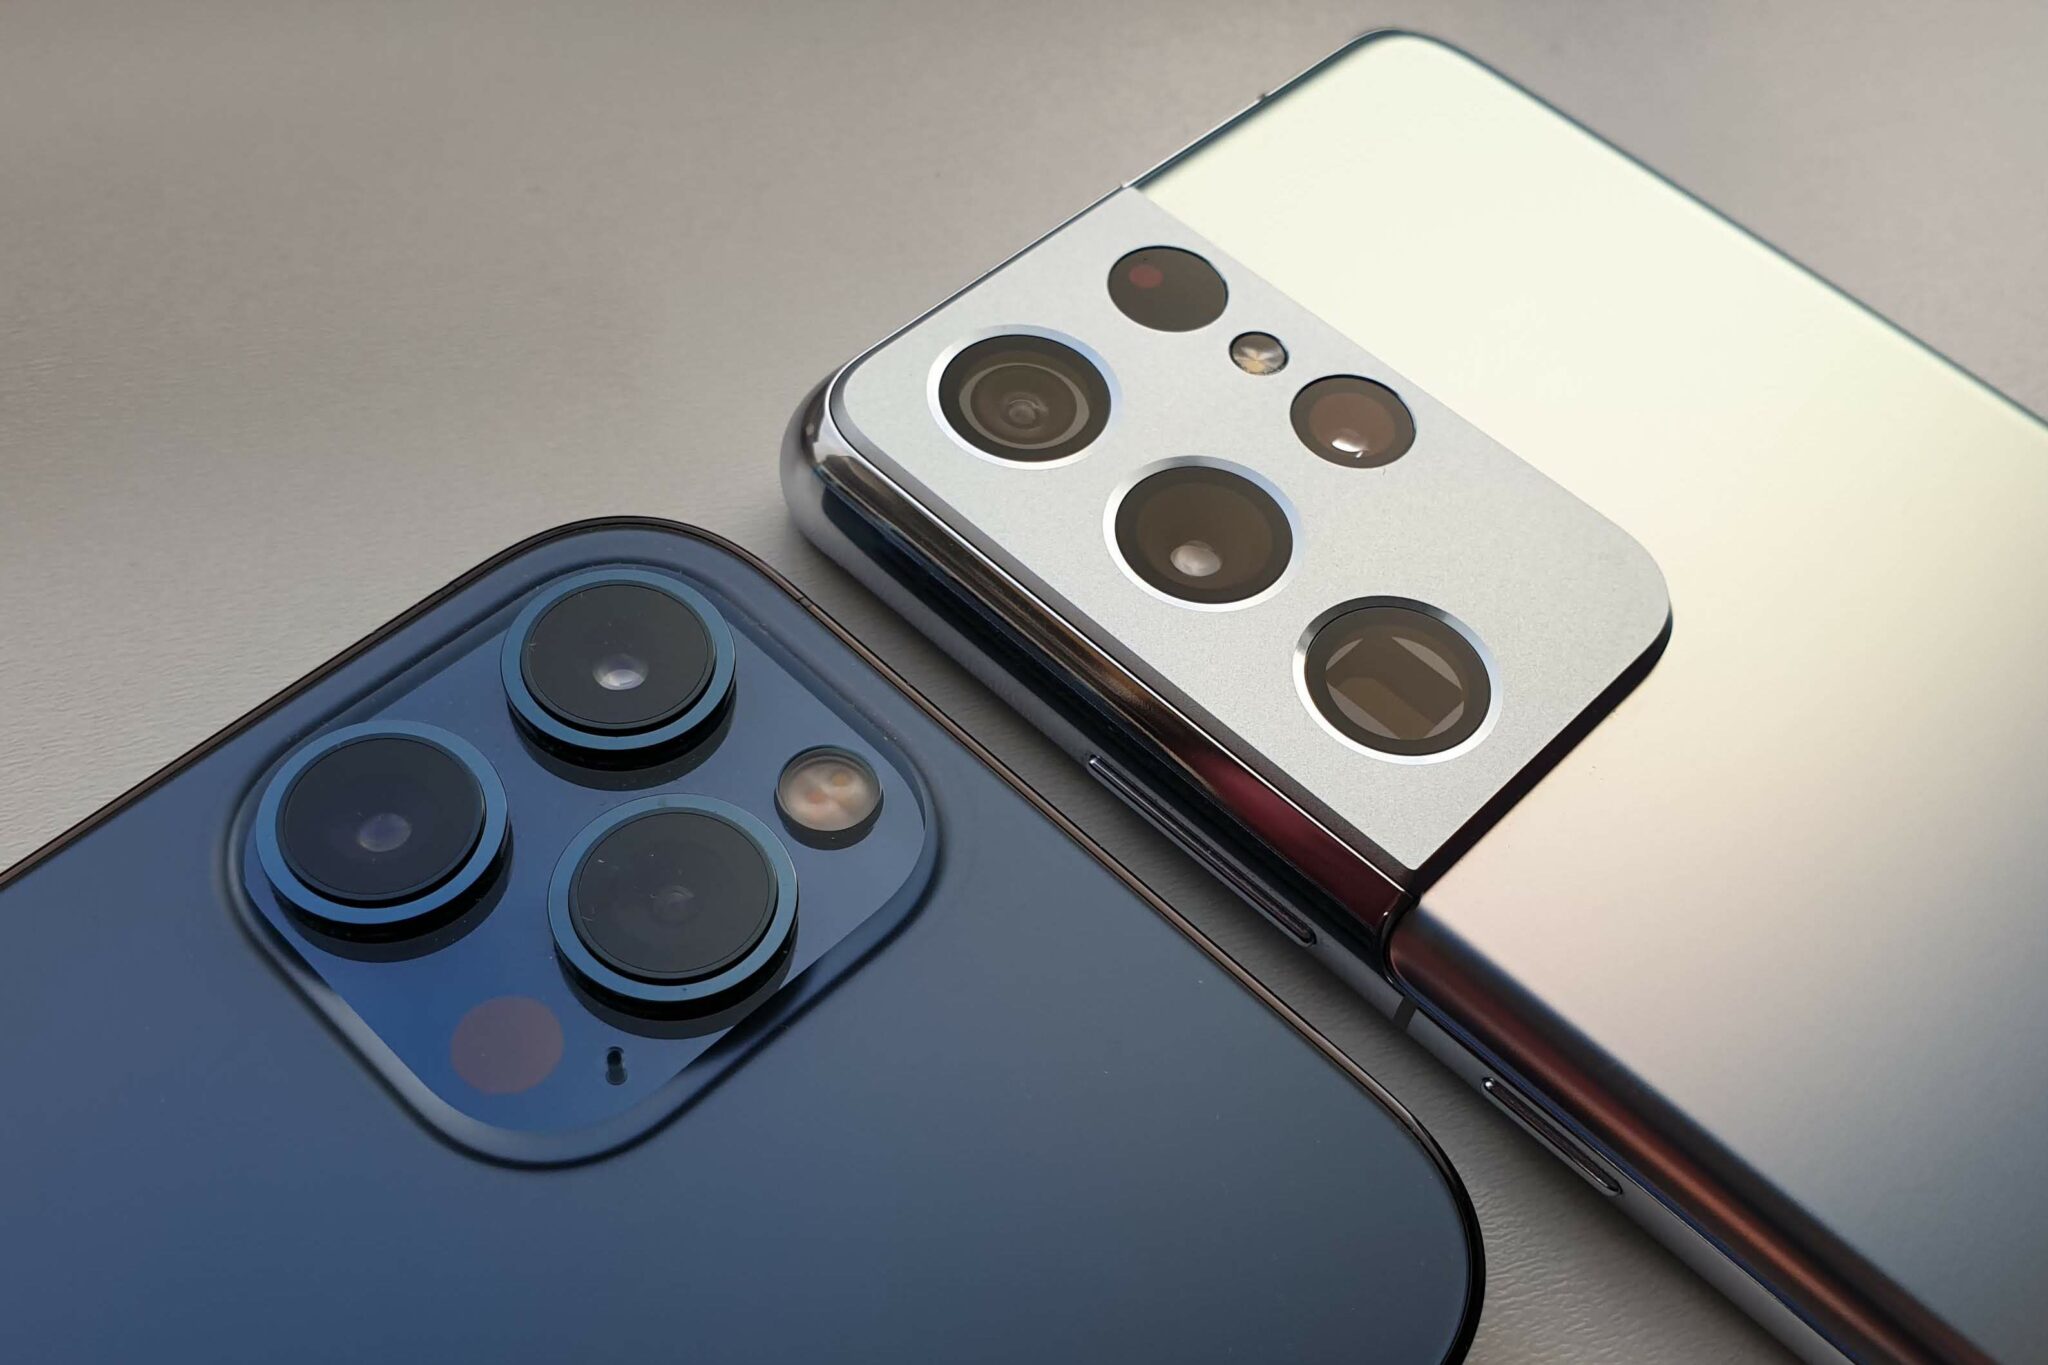 iPhone 12 Pro Max and S21 Ultra cams